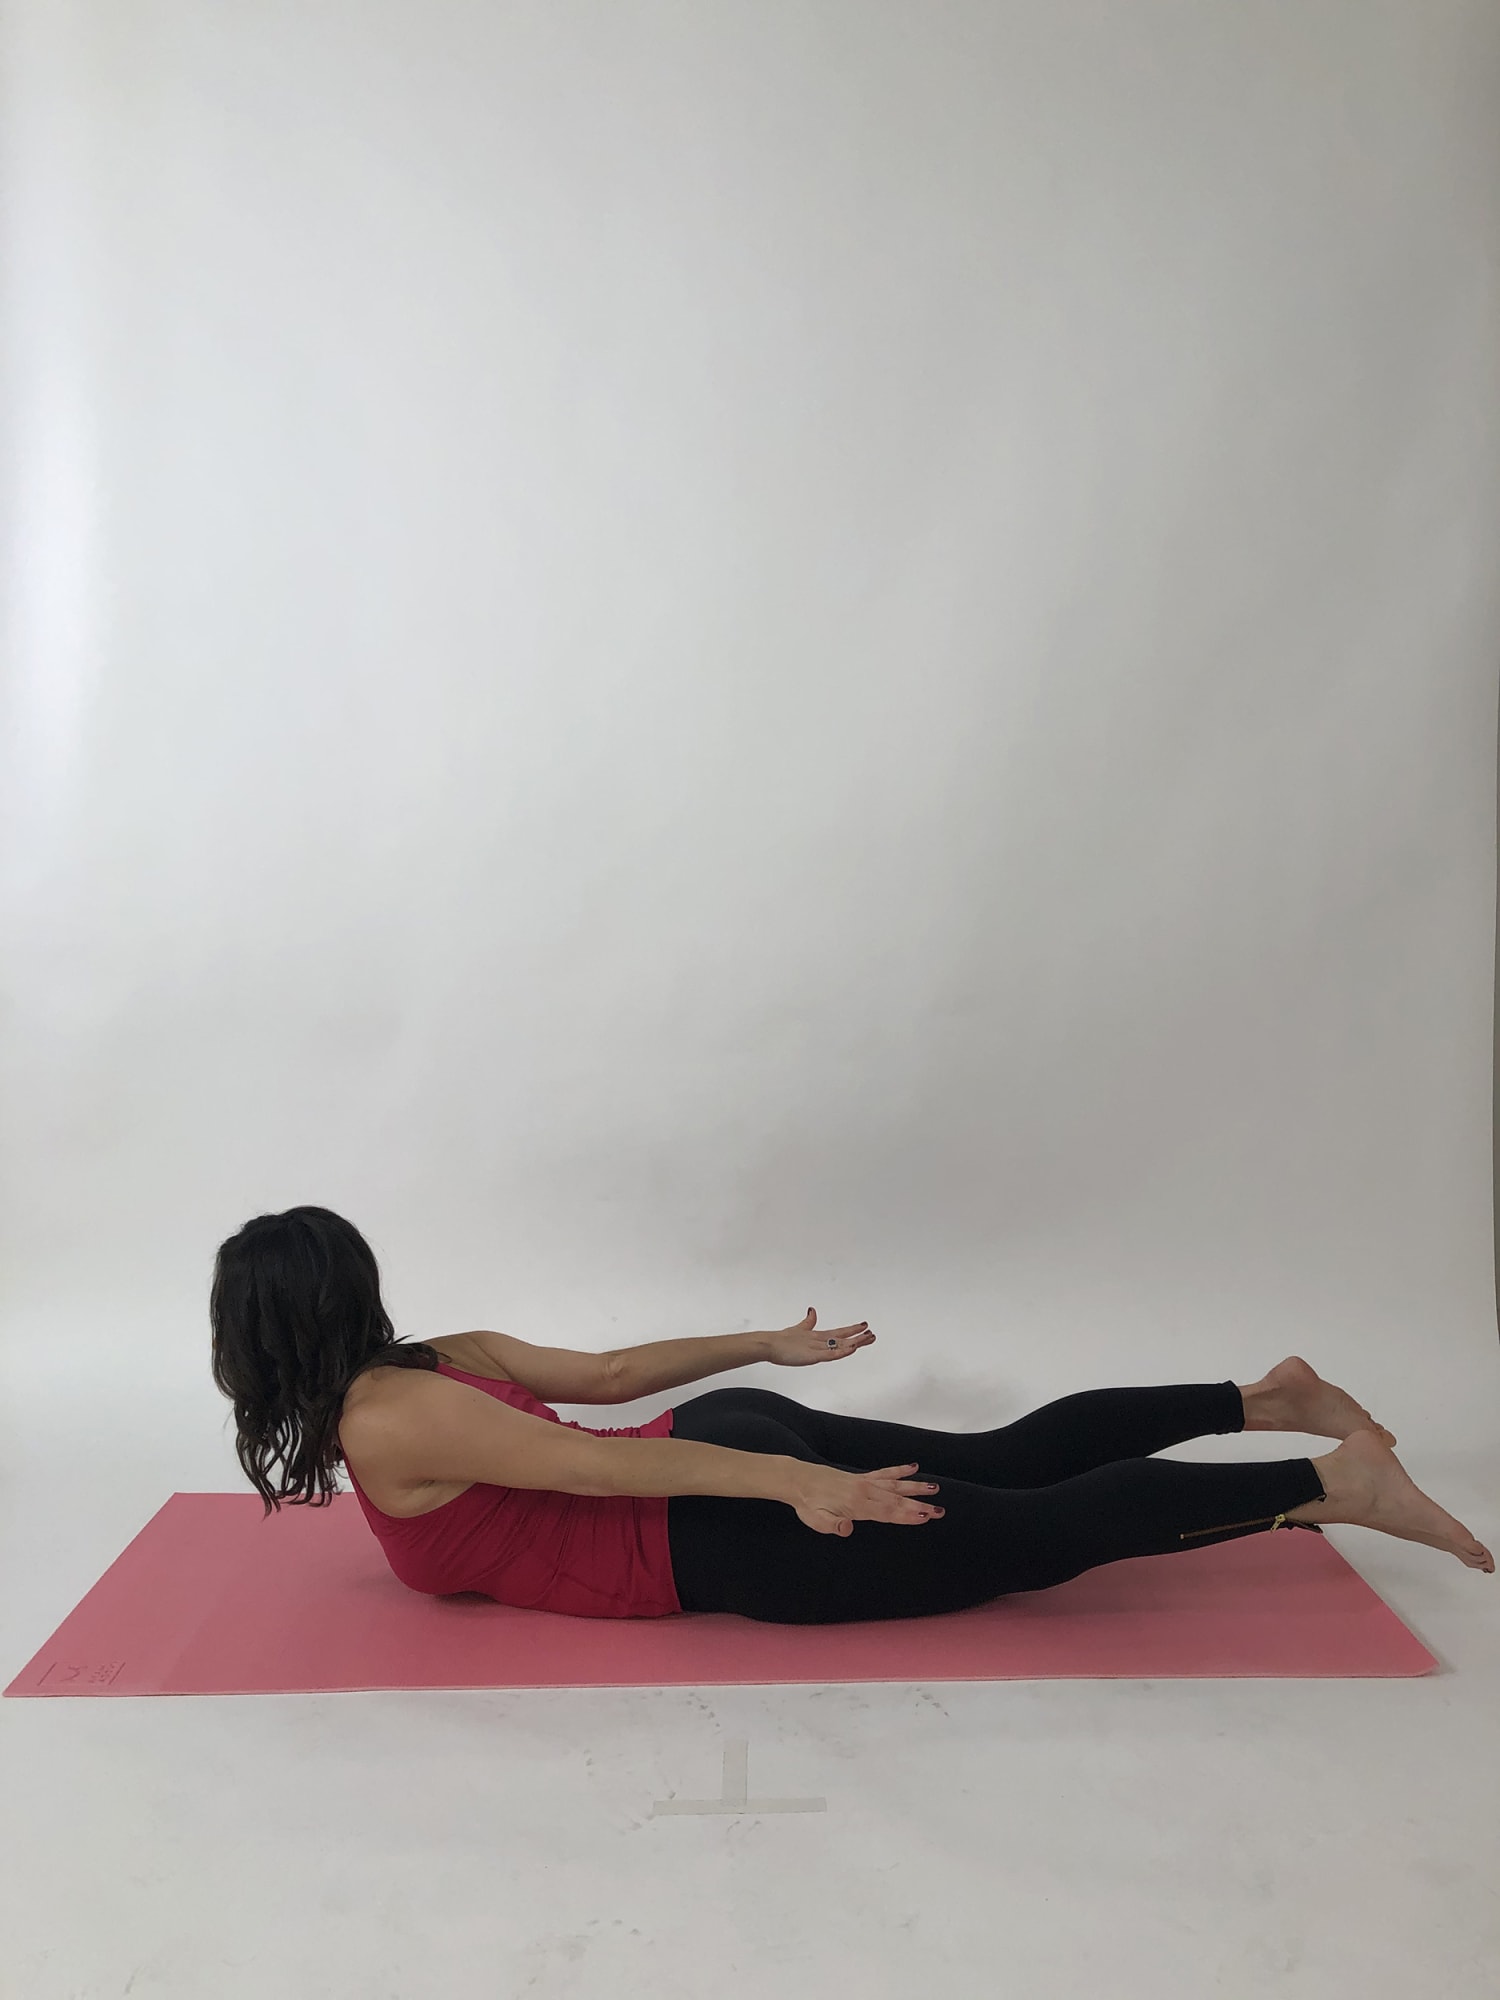 Yoga Poses For Better Digestion